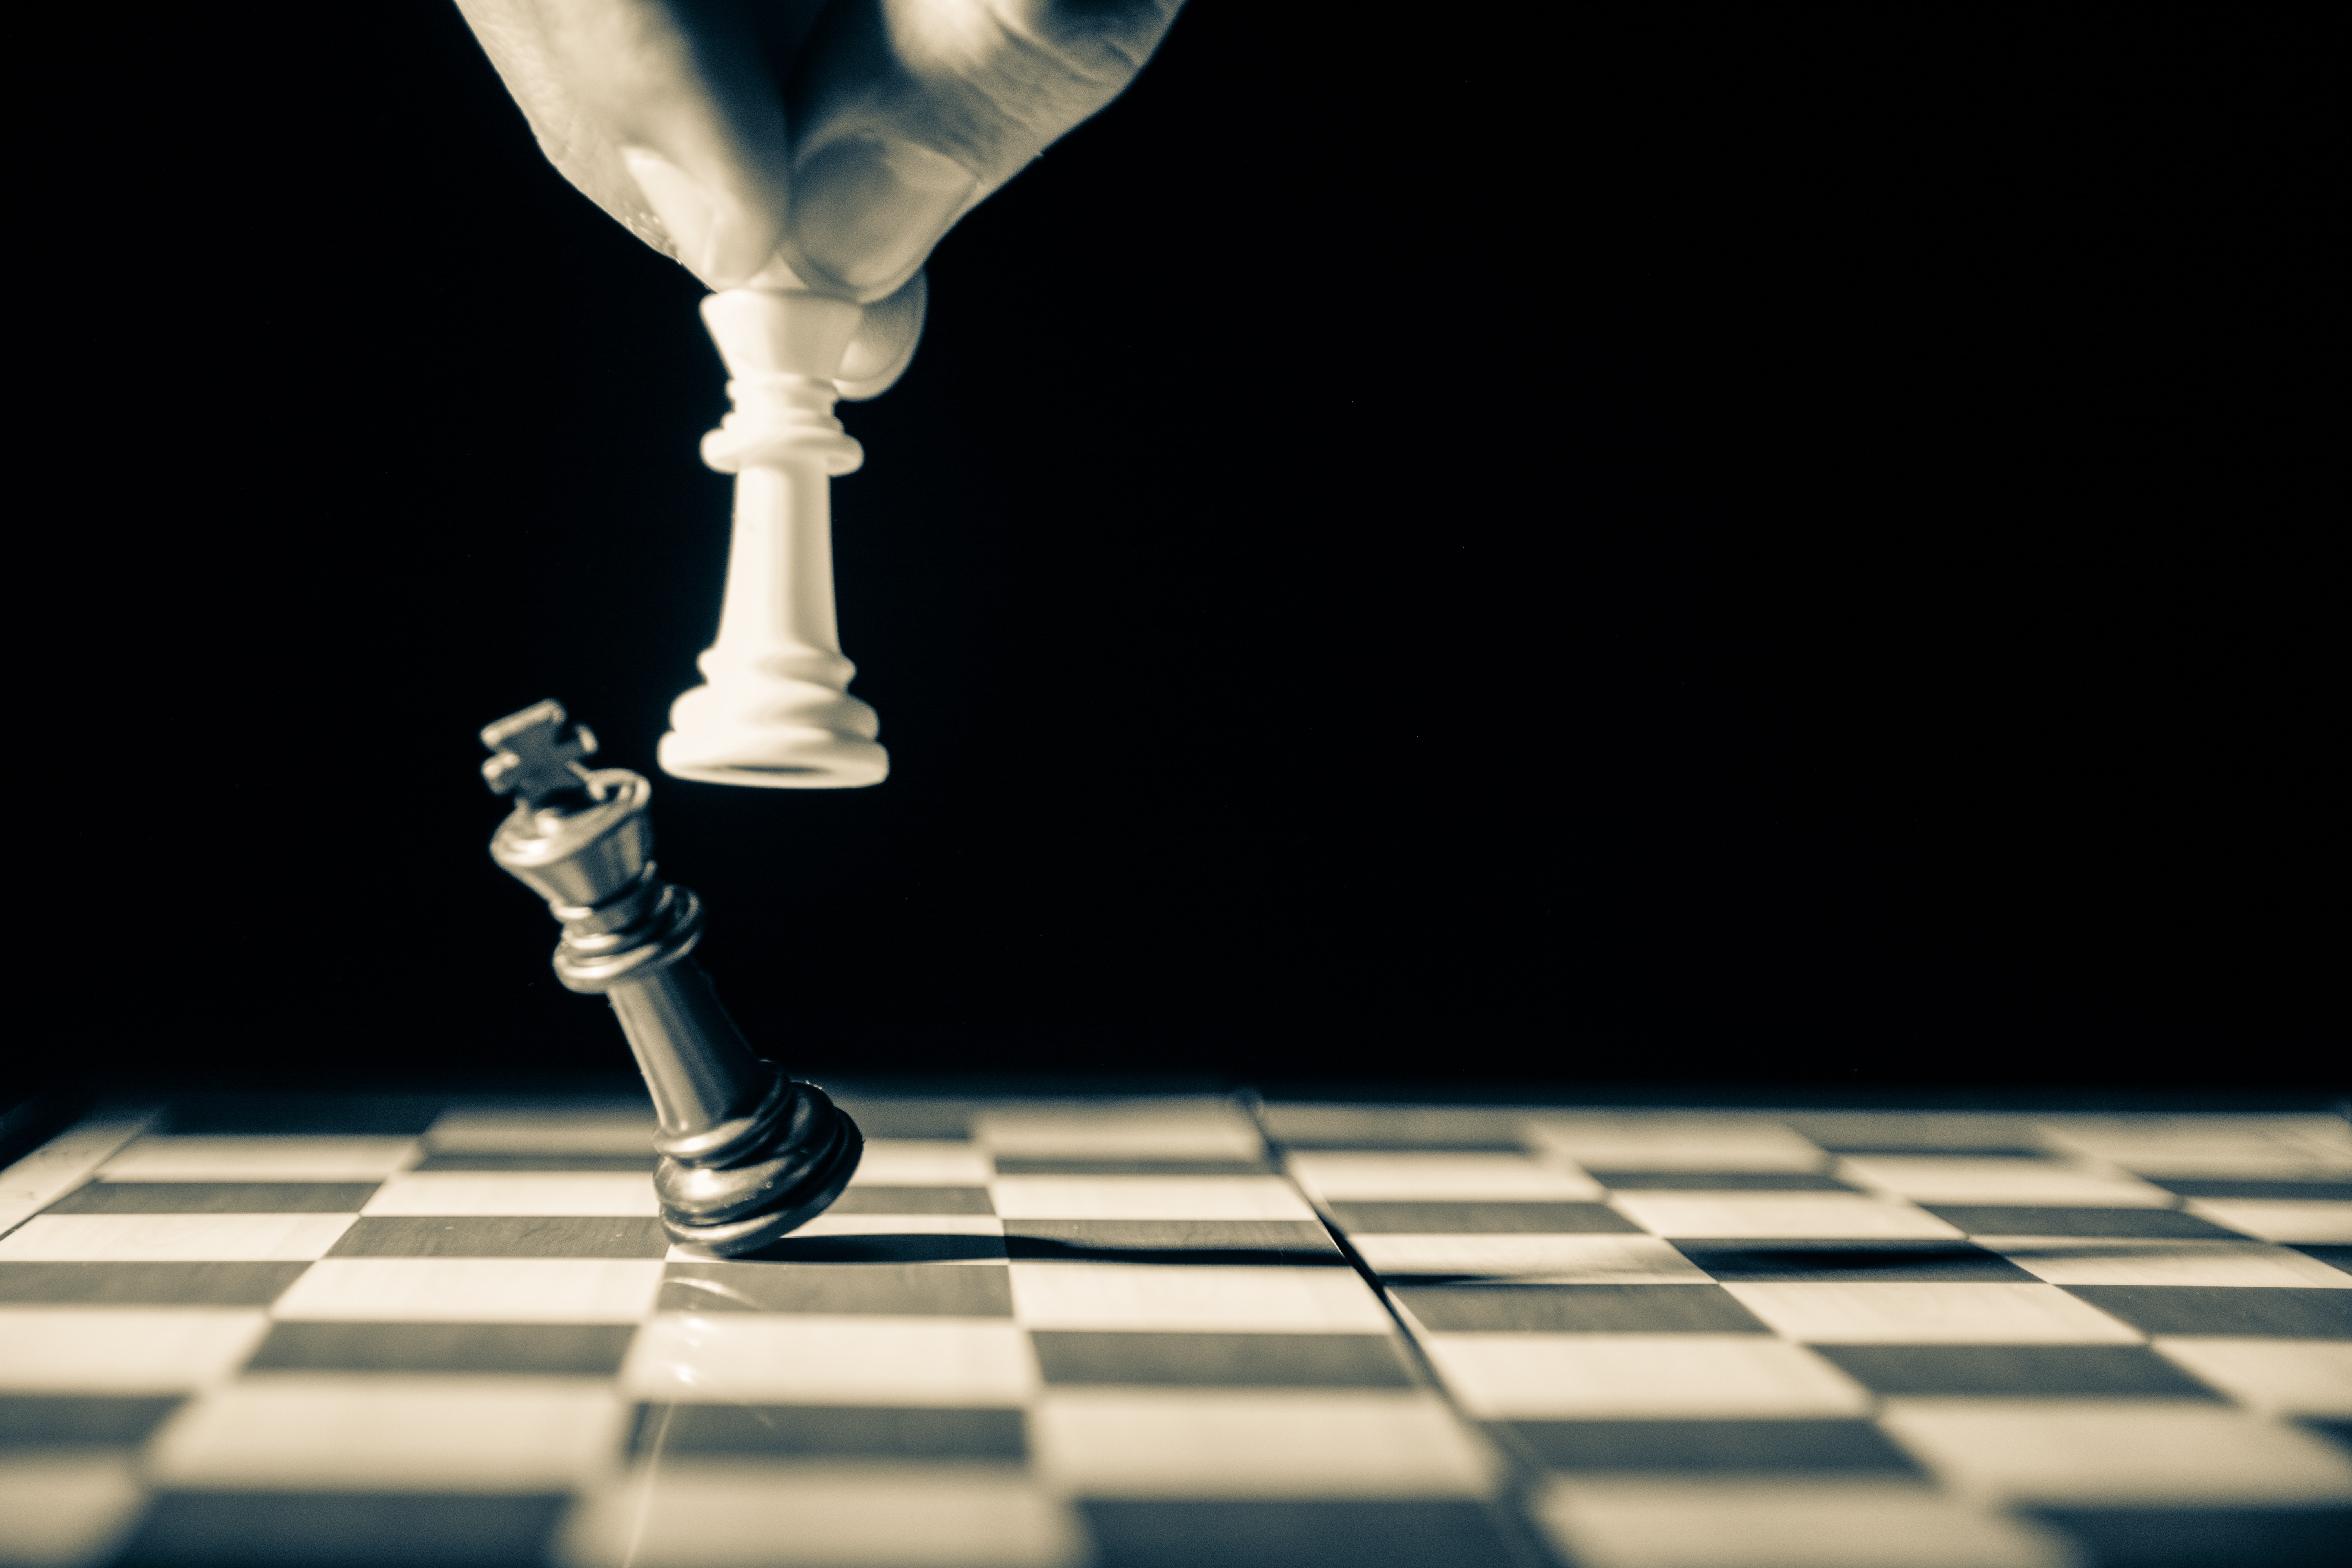 that there are more possible iterations in a chess game than than there are  atoms in the known universe. – DID YOU KNOW…